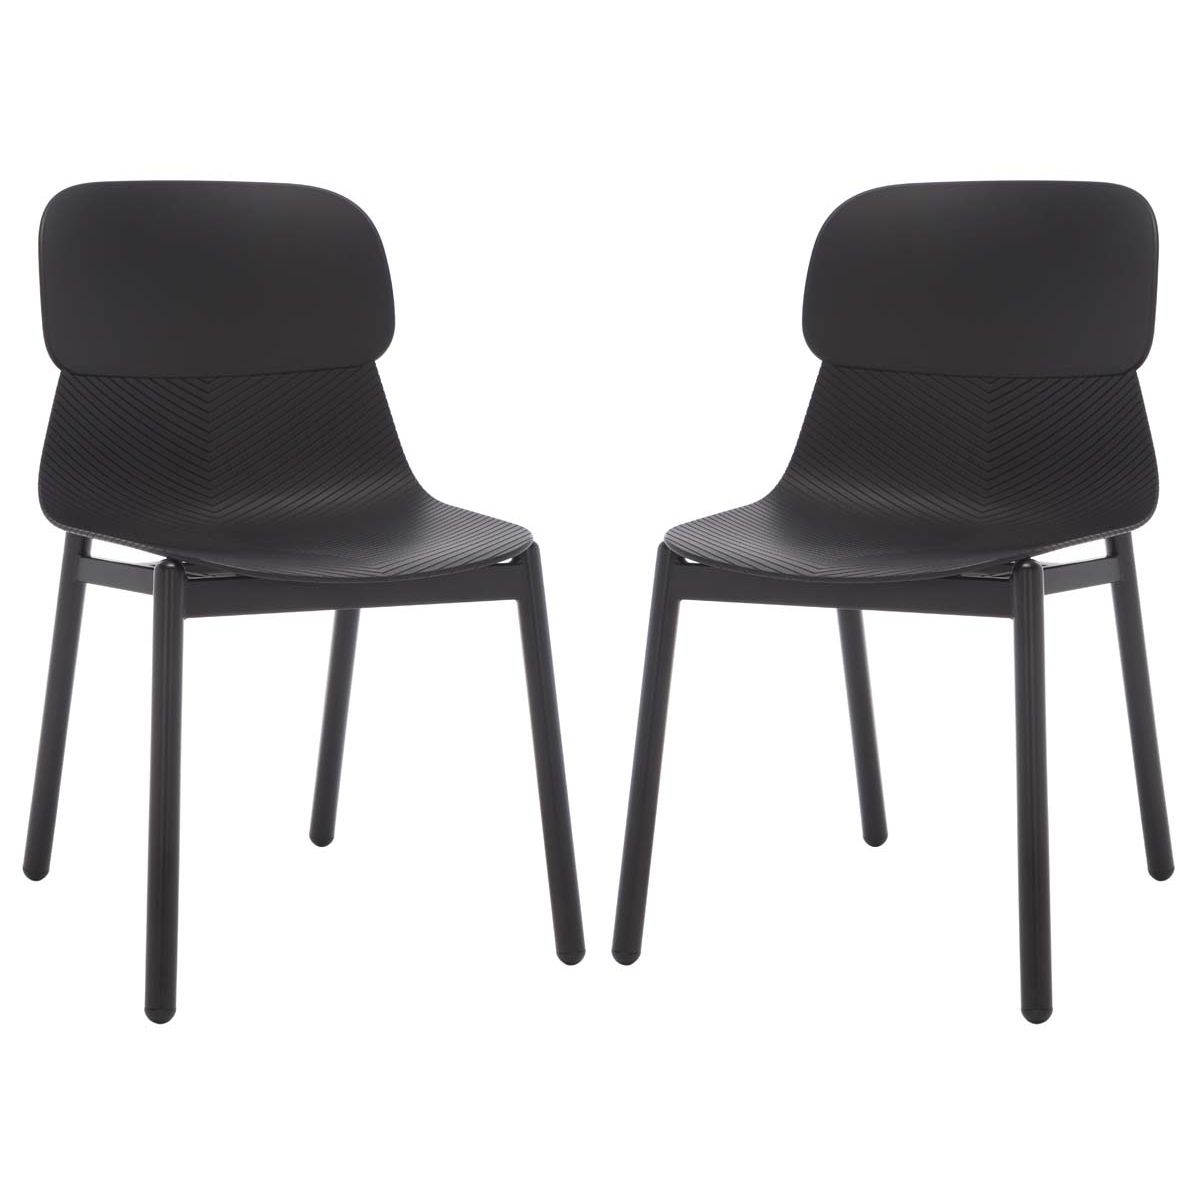 Safavieh Couture Abbie Dining Chairs (Set of 2)